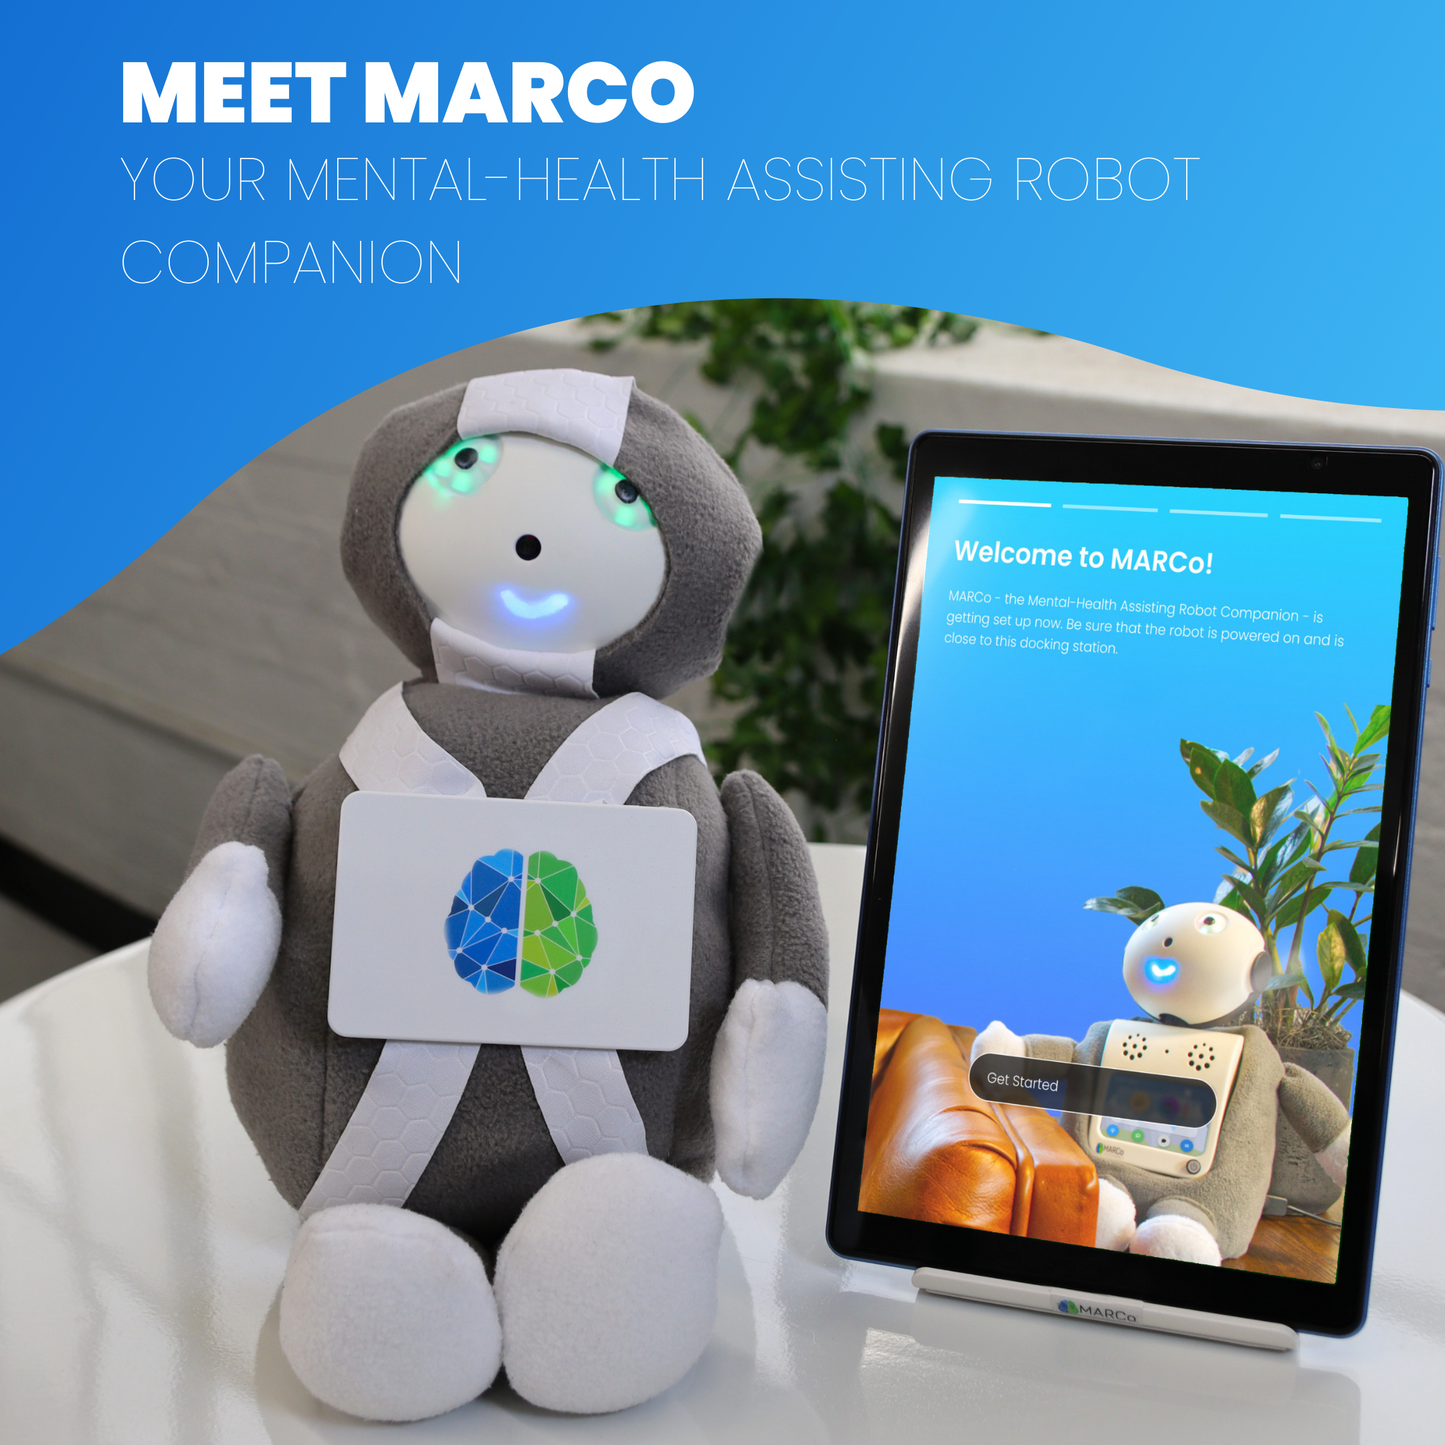 Companion robot with large tablet with caption saying MEET MARCO, YOUR MENTAL-HEALTH ASSISTING ROBOT COMPANION